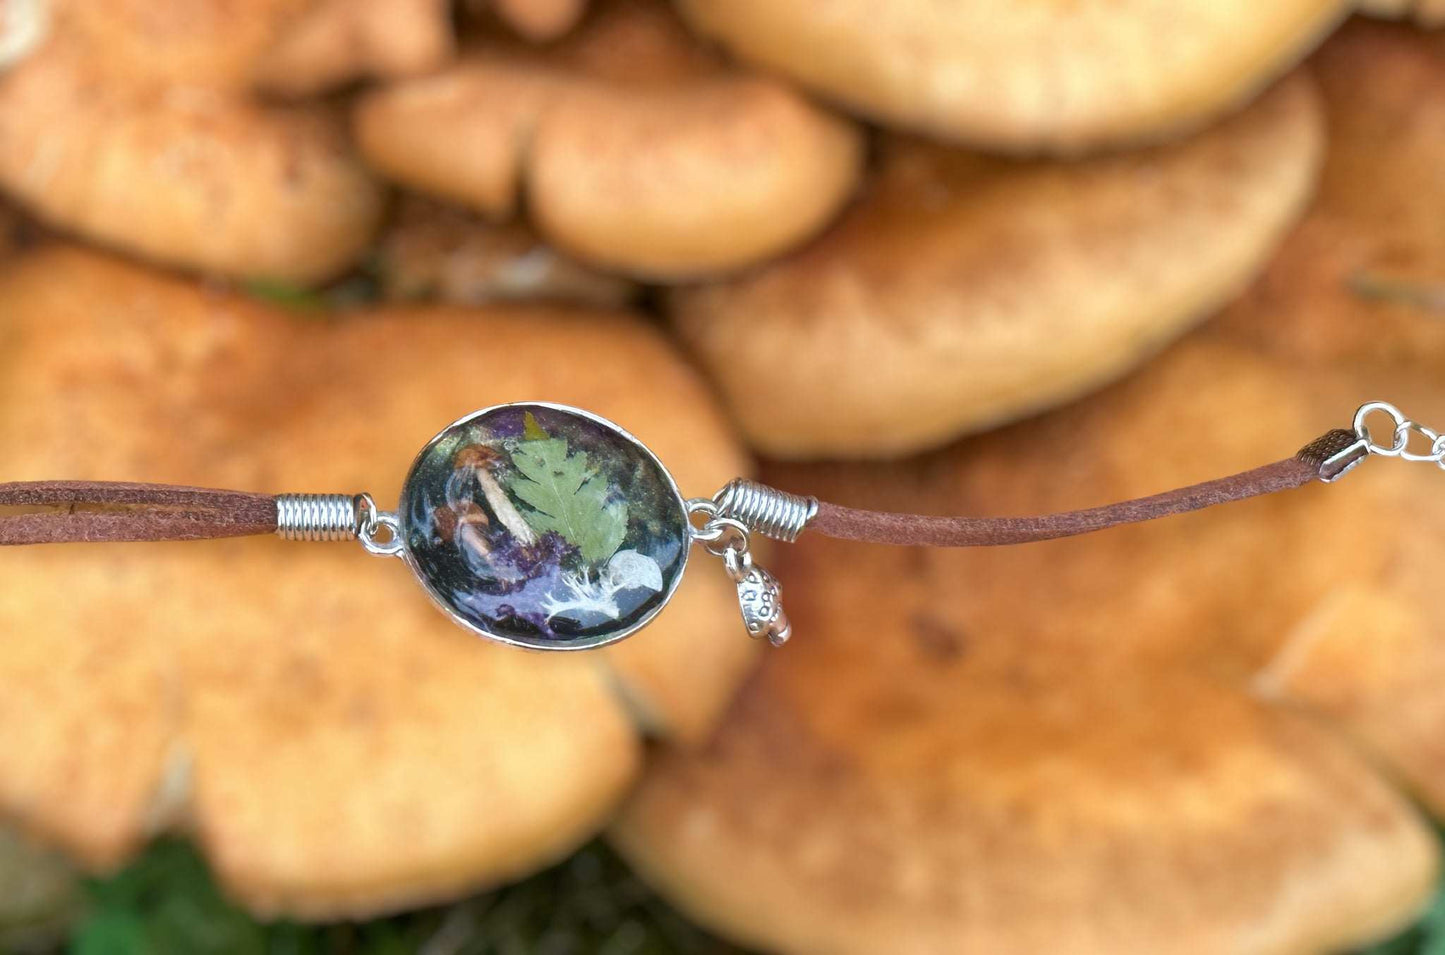 Handmade Resin Bracelet with Dried Botanical Accents & Flowers